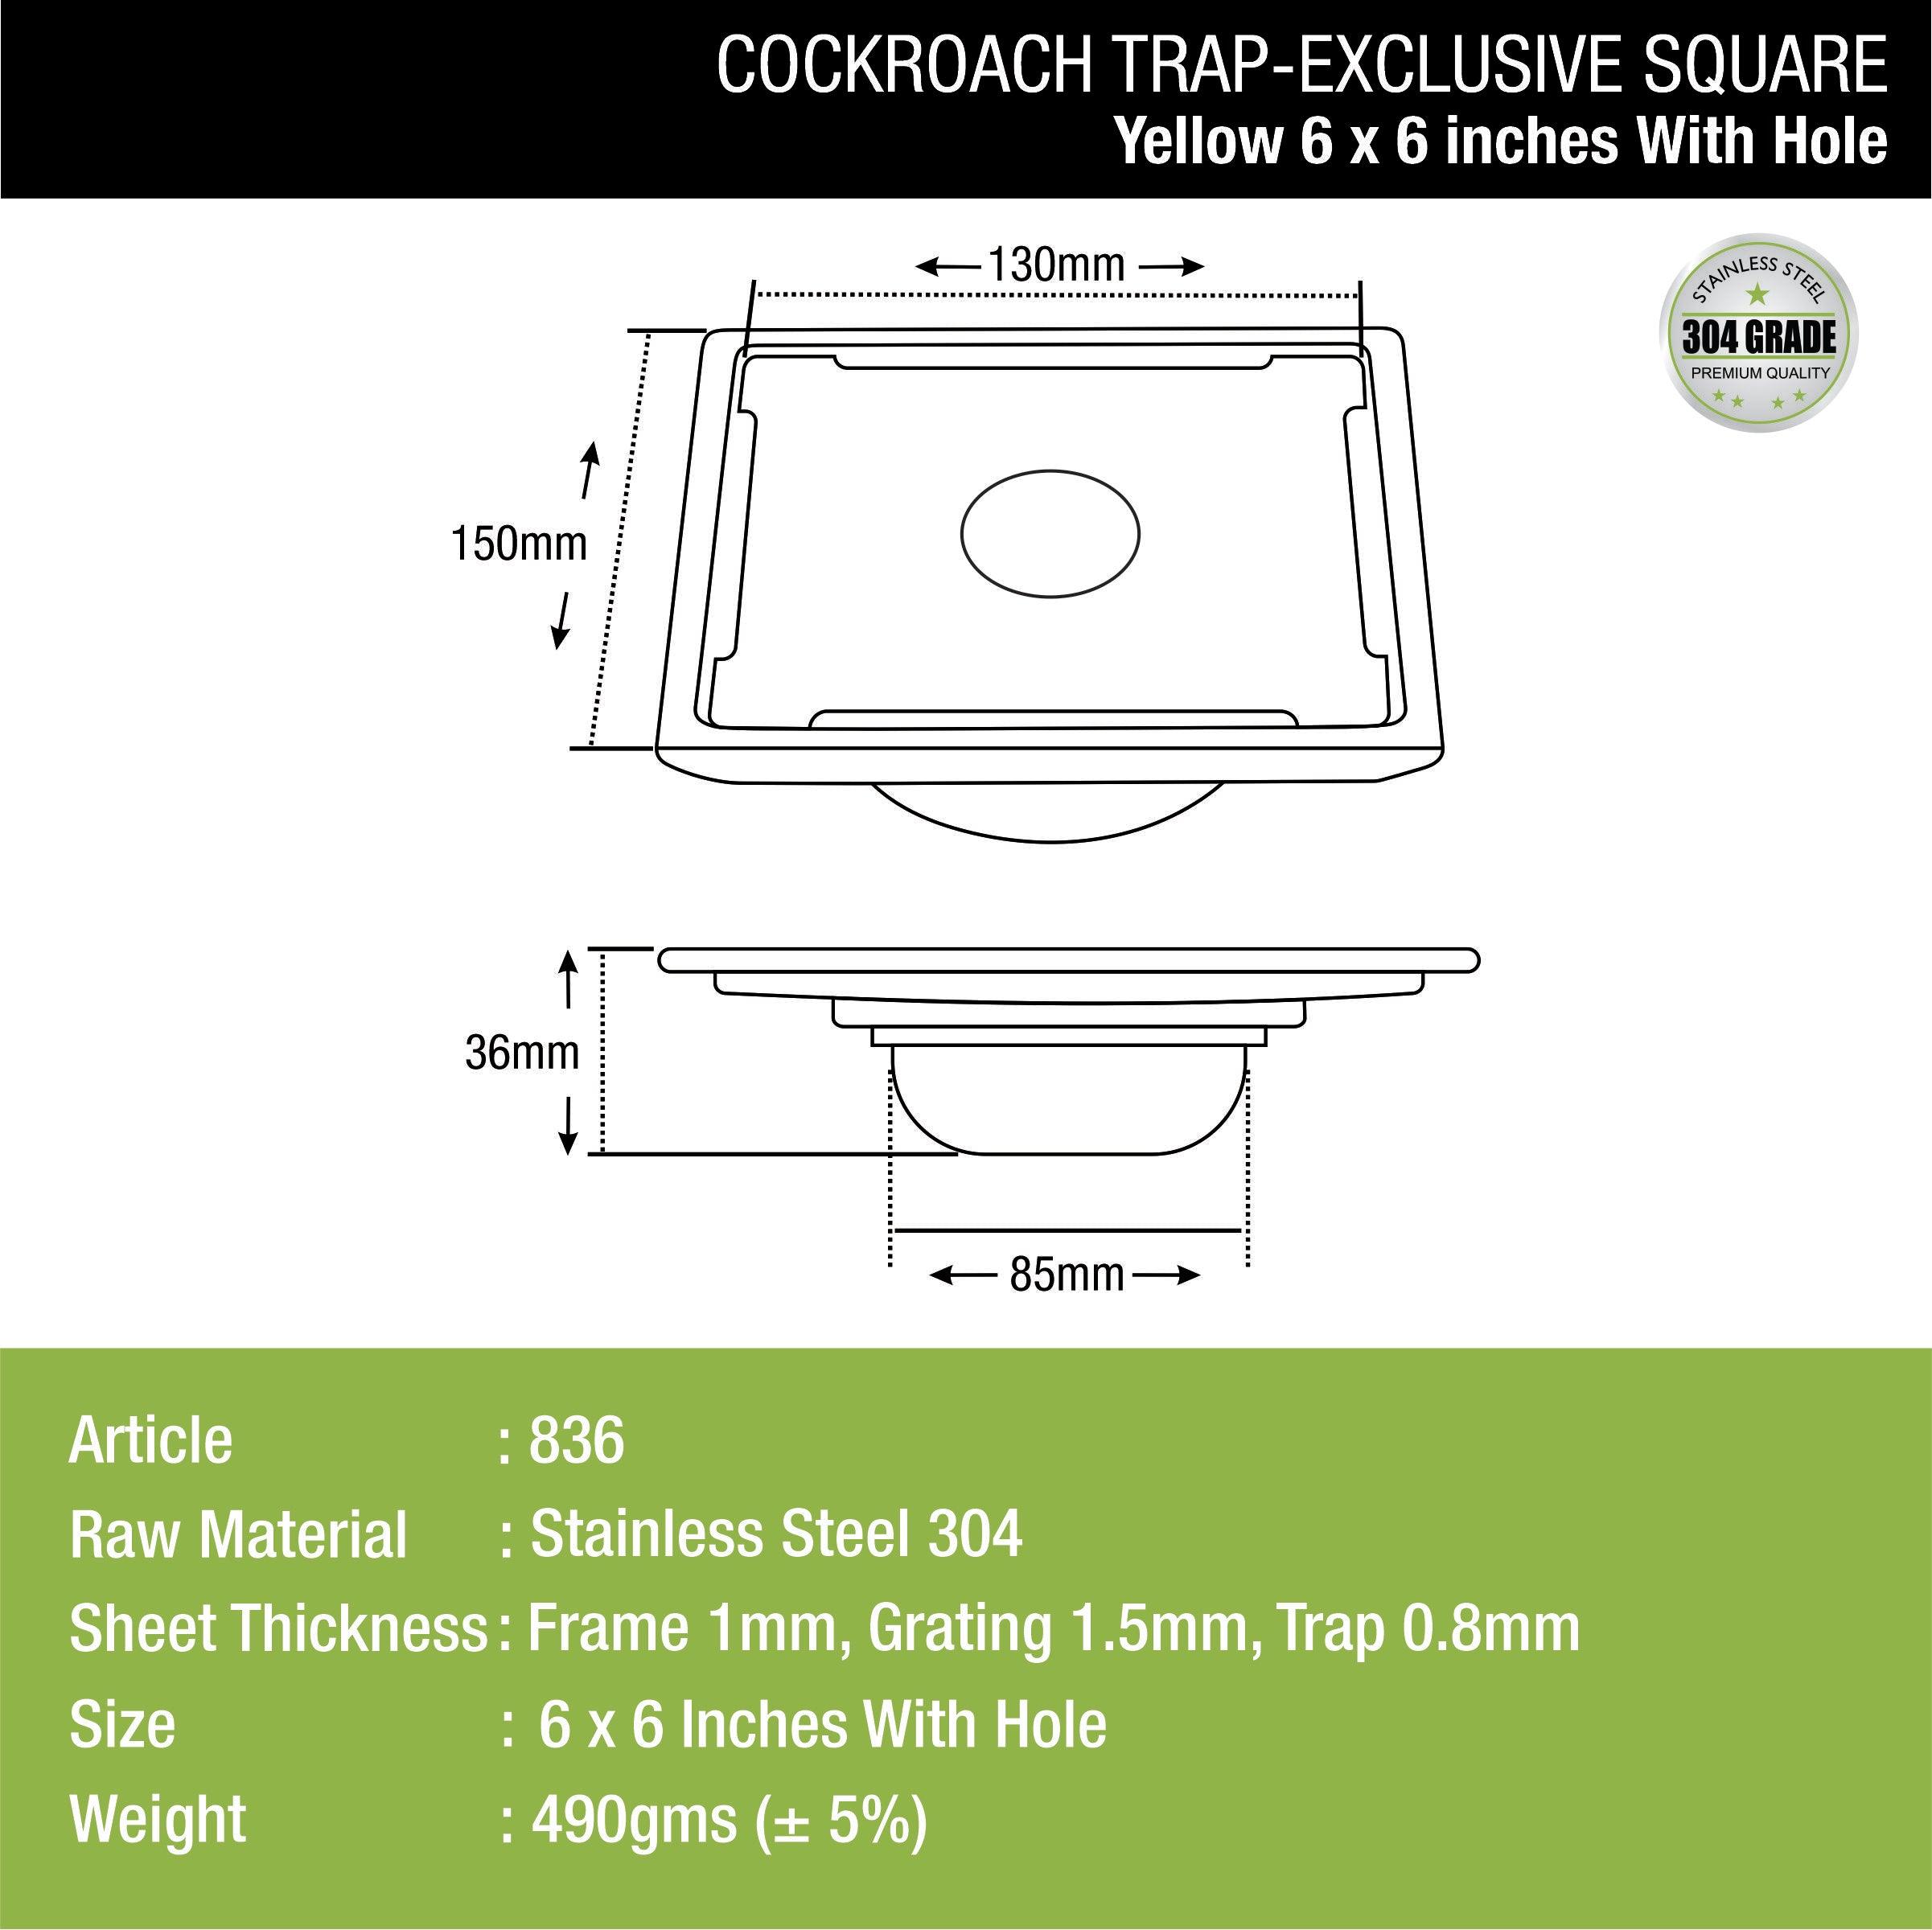 Yellow Exclusive Square Floor Drain (6 x 6 Inches) with Hole and Cockroach Trap dimensions and sizes